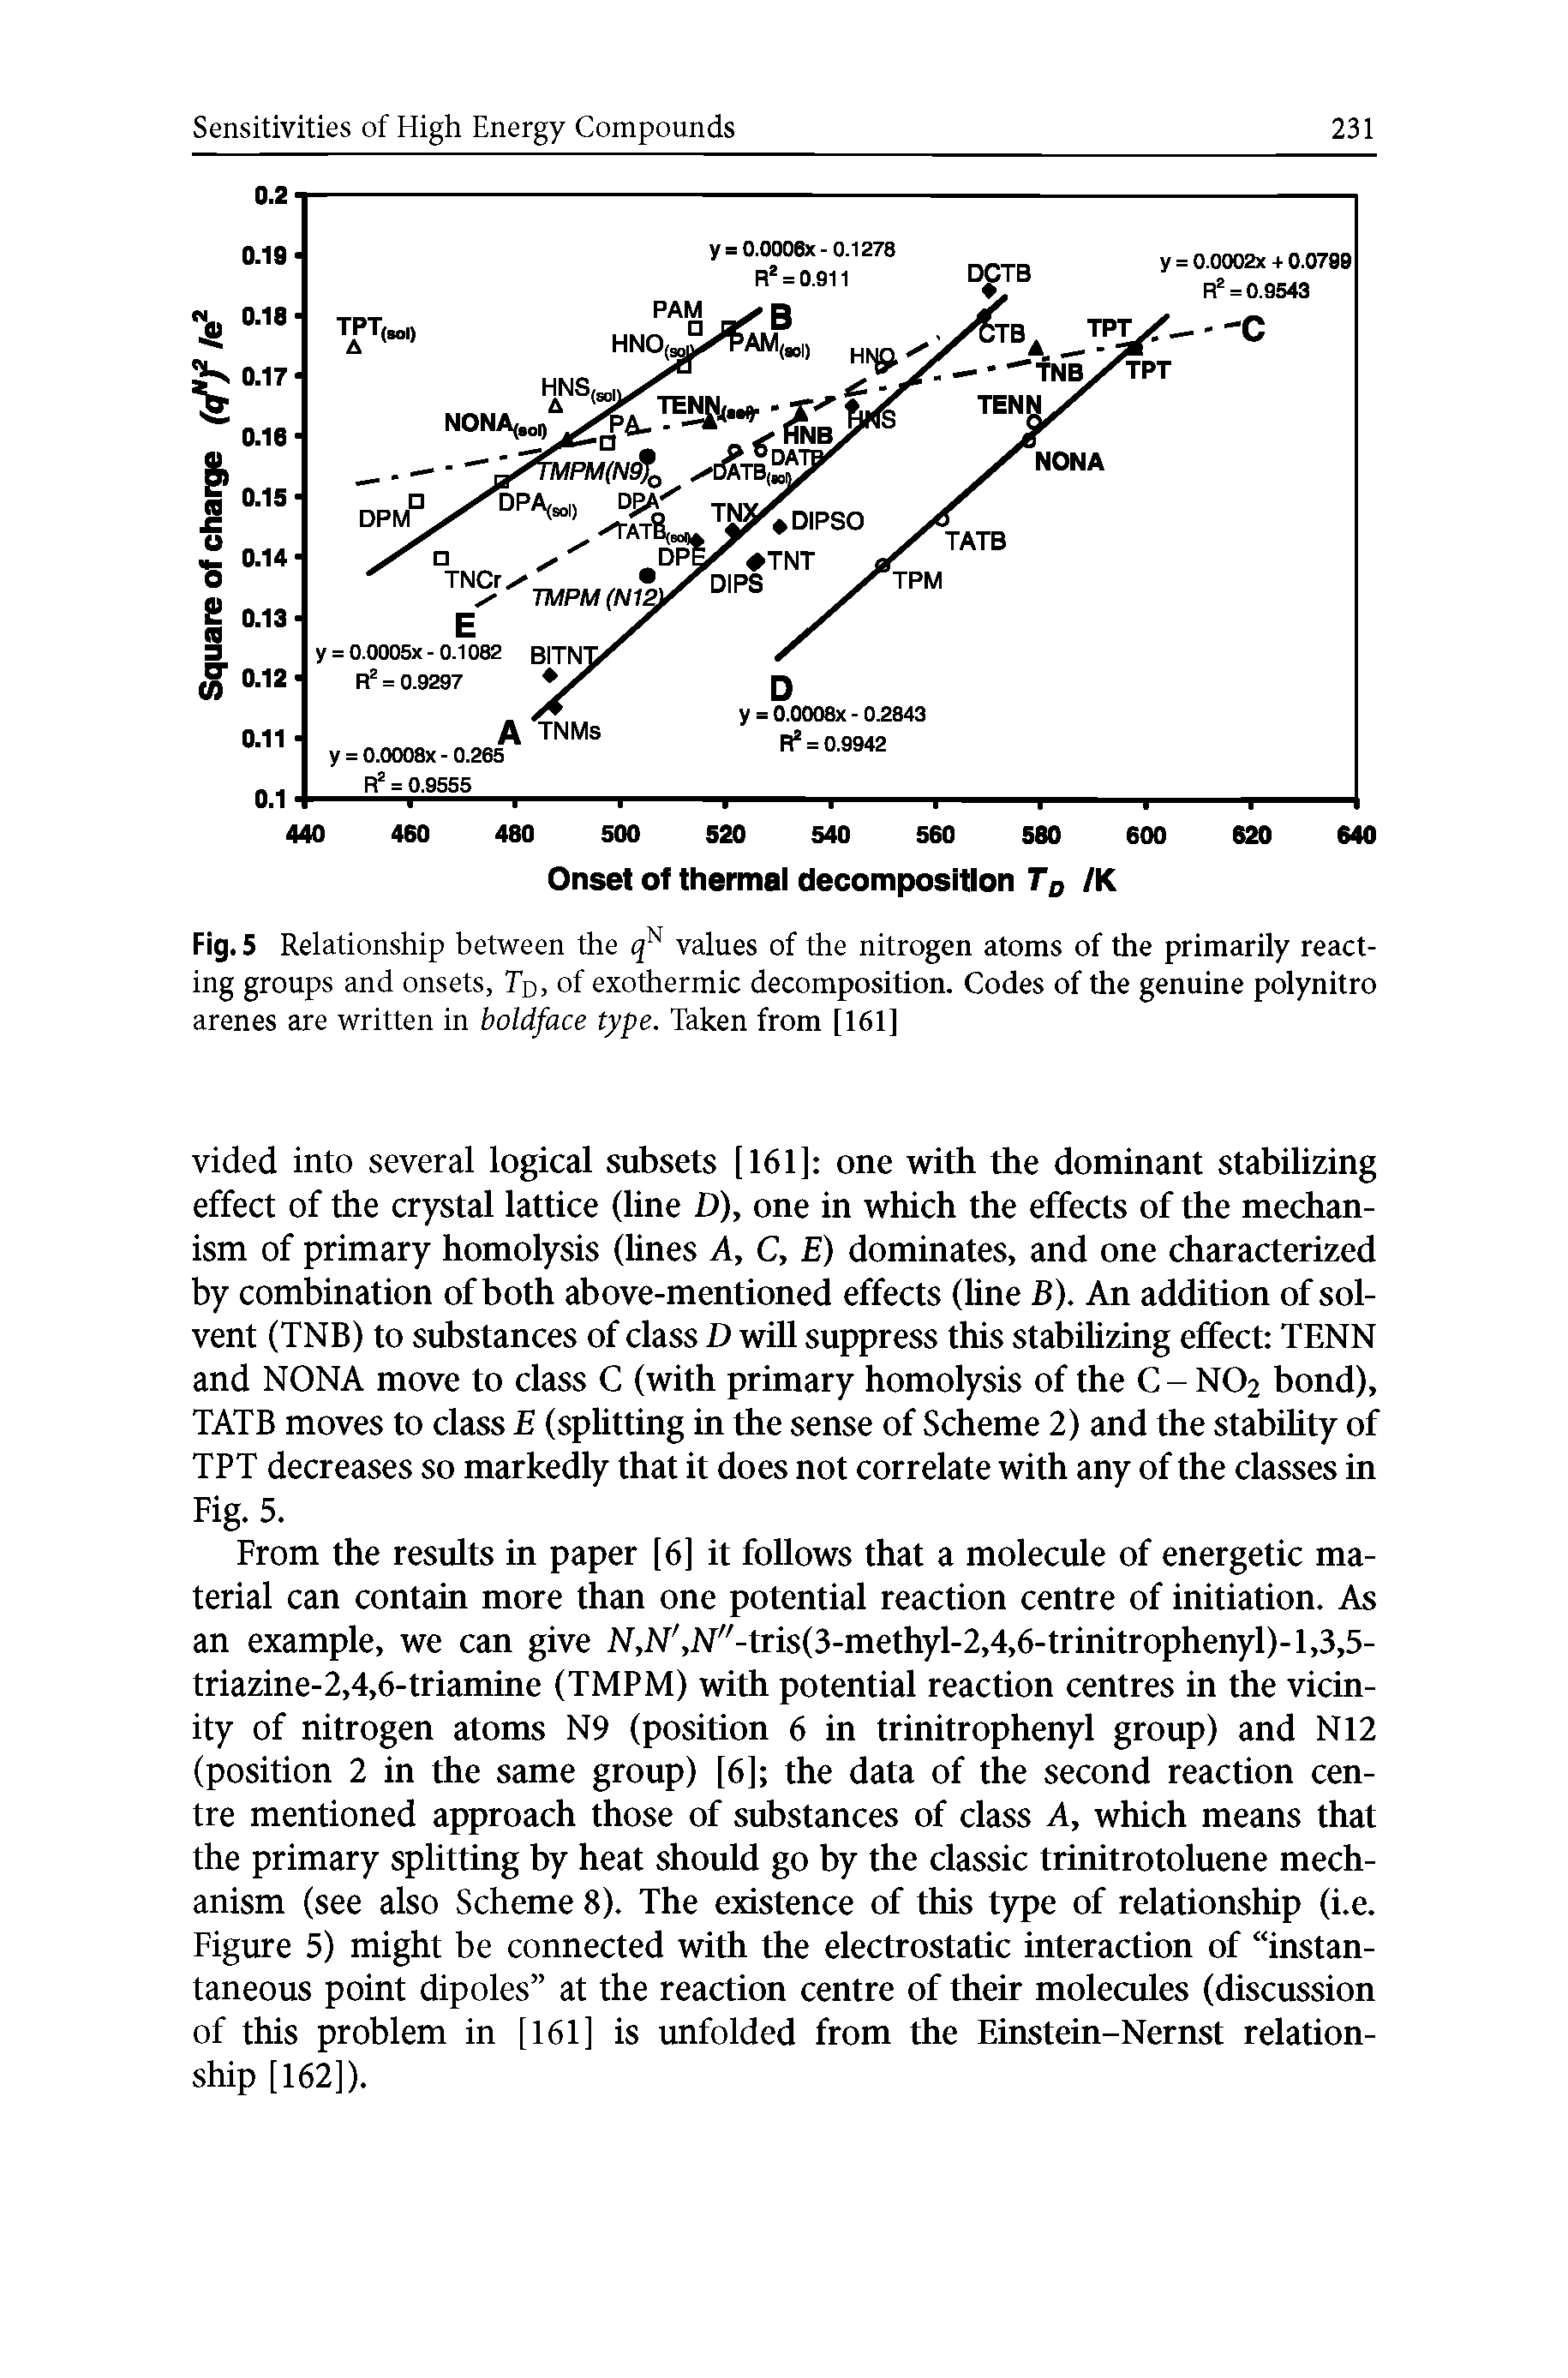 Fig. 5 Relationship between the values of the nitrogen atoms of the primarily reacting groups and onsets, Td, of exothermic decomposition. Codes of the genuine polynitro arenes are written in boldface type. Taken from [161]...